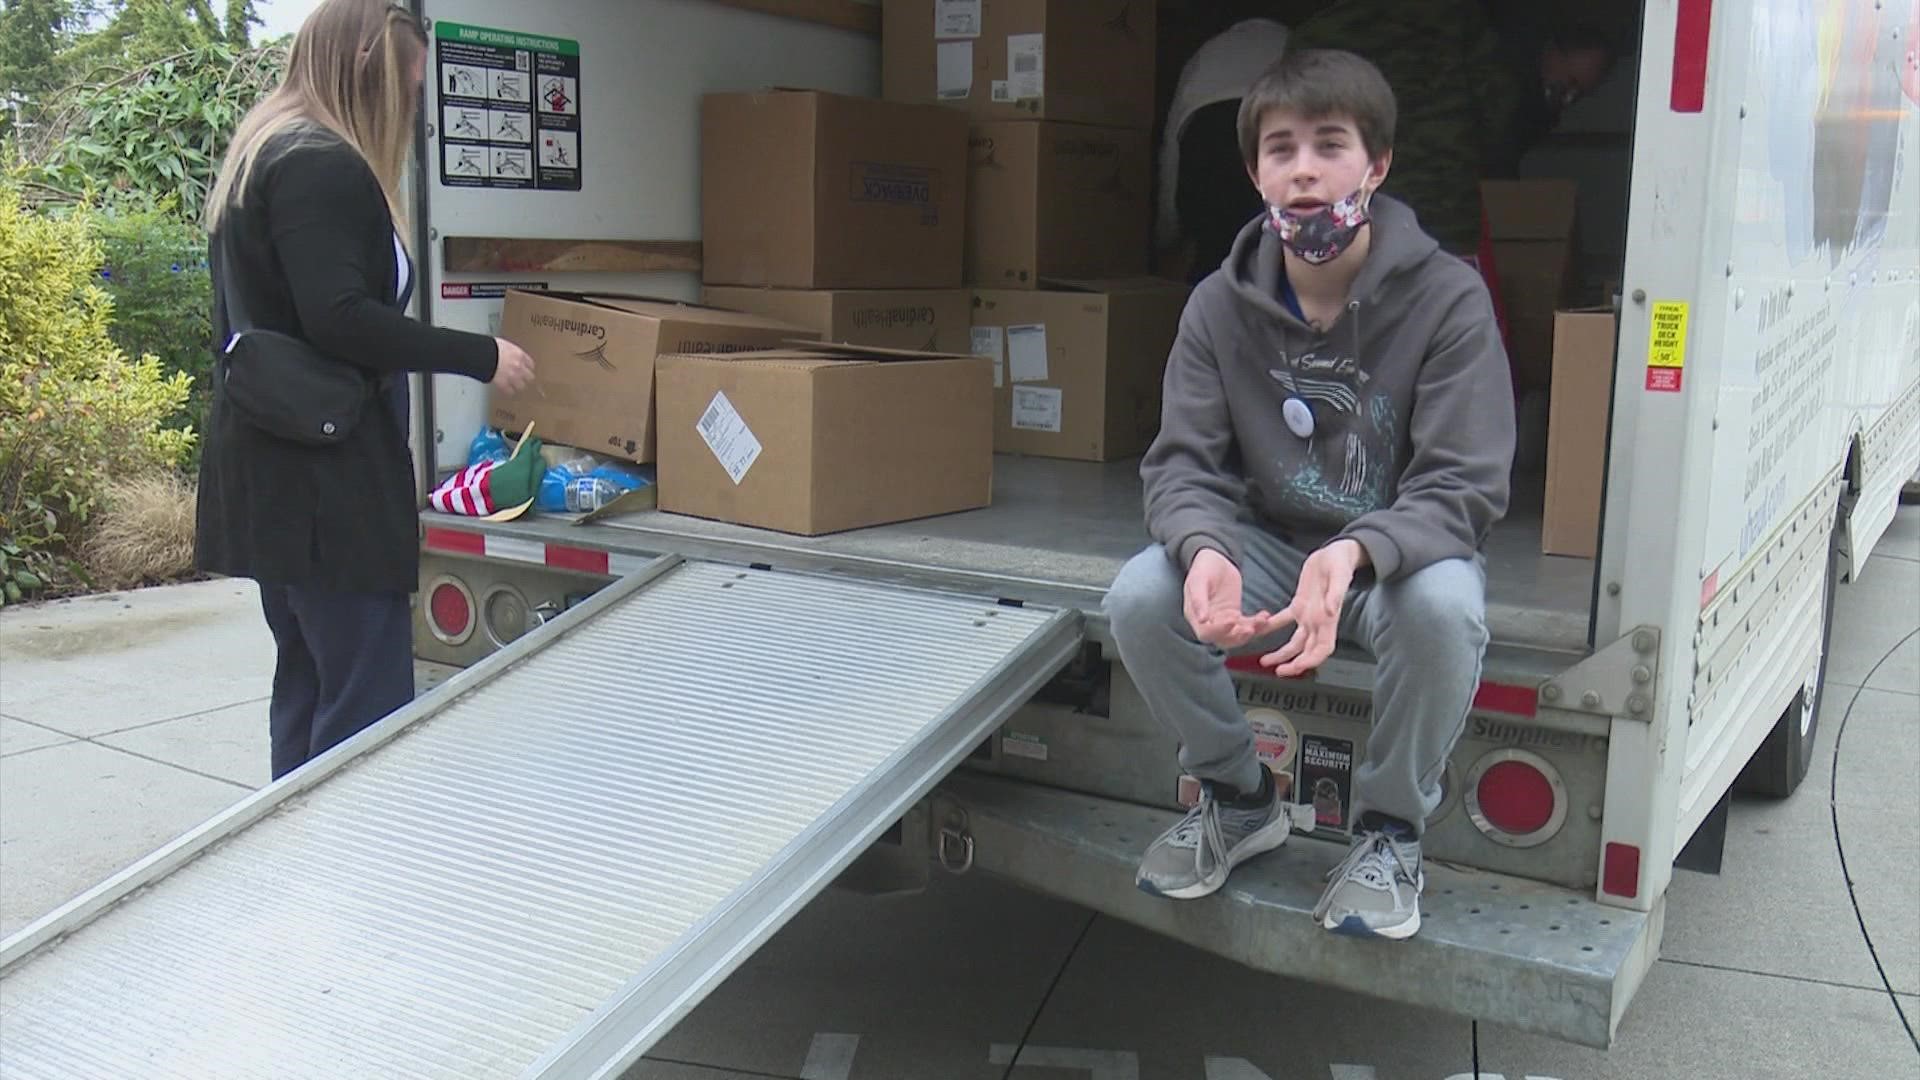 This is Zach Darner's seventh year collecting toys. It all started because of his personal connection to spending time in the hospital.